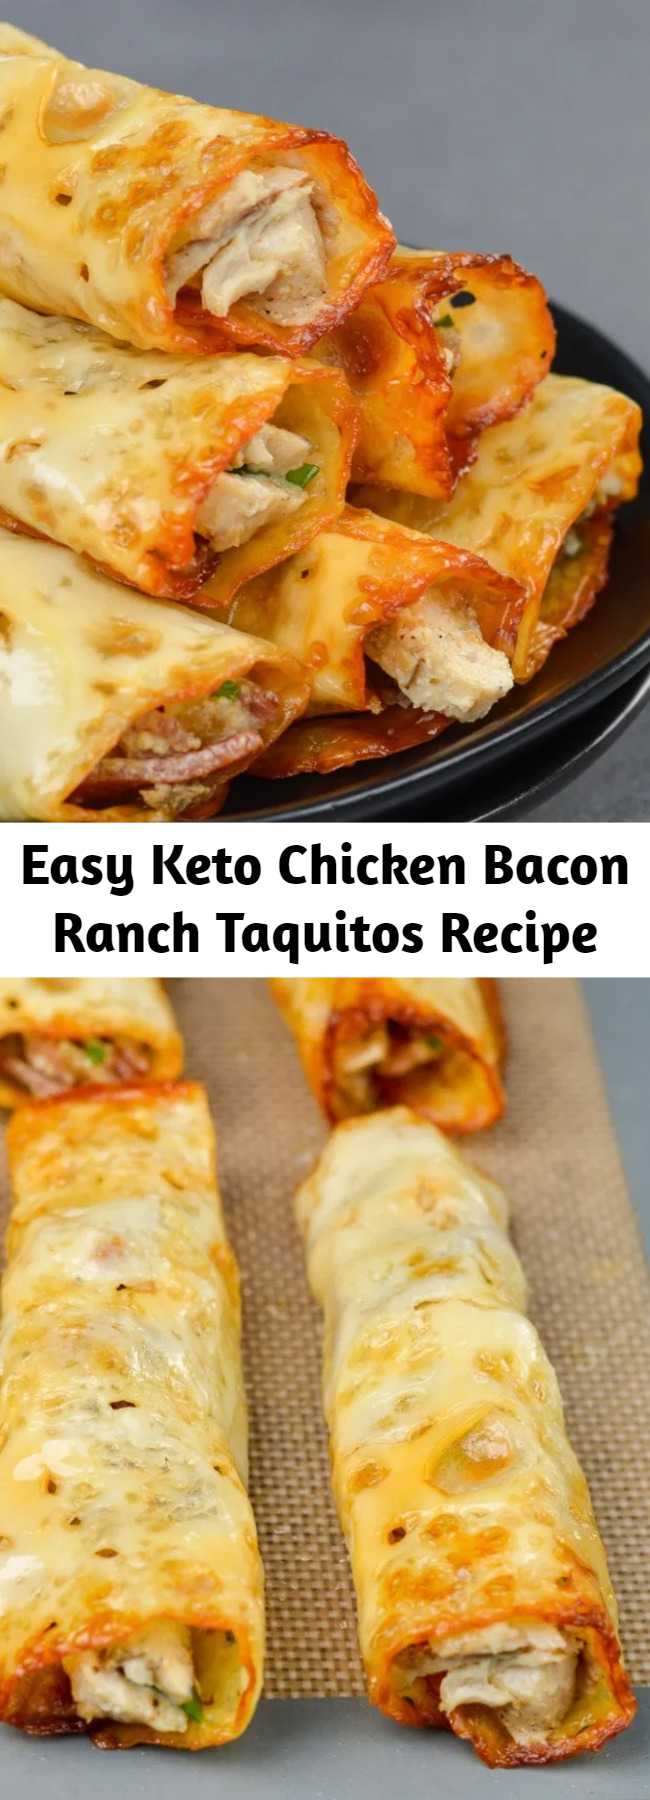 Easy Keto Chicken Bacon Ranch Taquitos Recipe - These quick and easy Keto Chicken Bacon Ranch Taquitos are the perfect low carb appetizer or snack! #keto #lowcarb